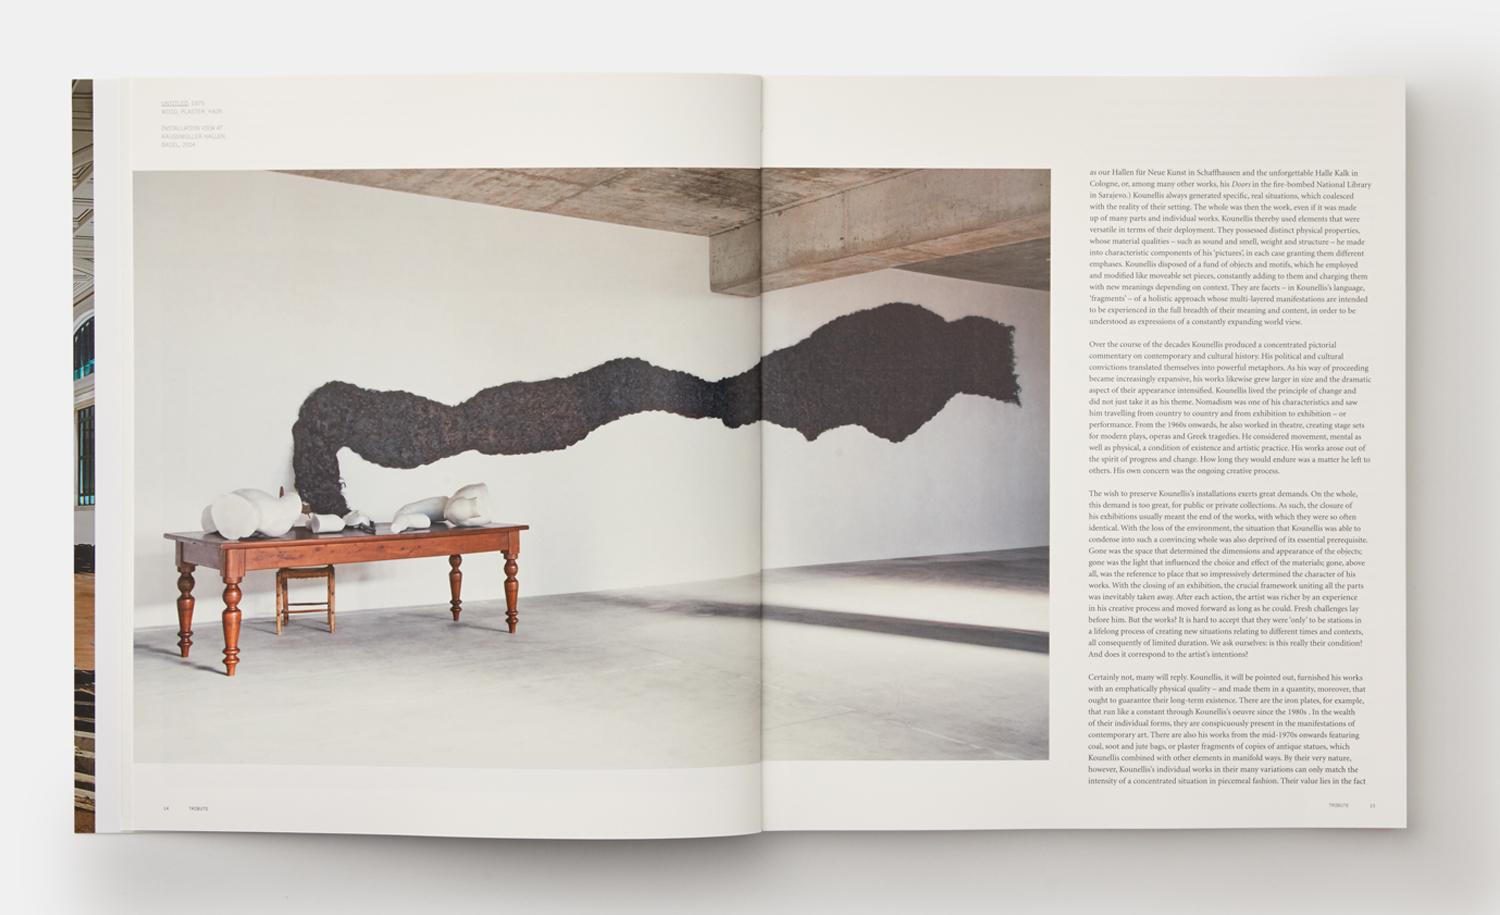 The ultimate monograph on one of the most important artists of the twentieth century - a key figure in Arte Povera
This book is the final, most comprehensive book ever made by Greek-born Jannis Kounellis, one of the key artists in the Arte Povera